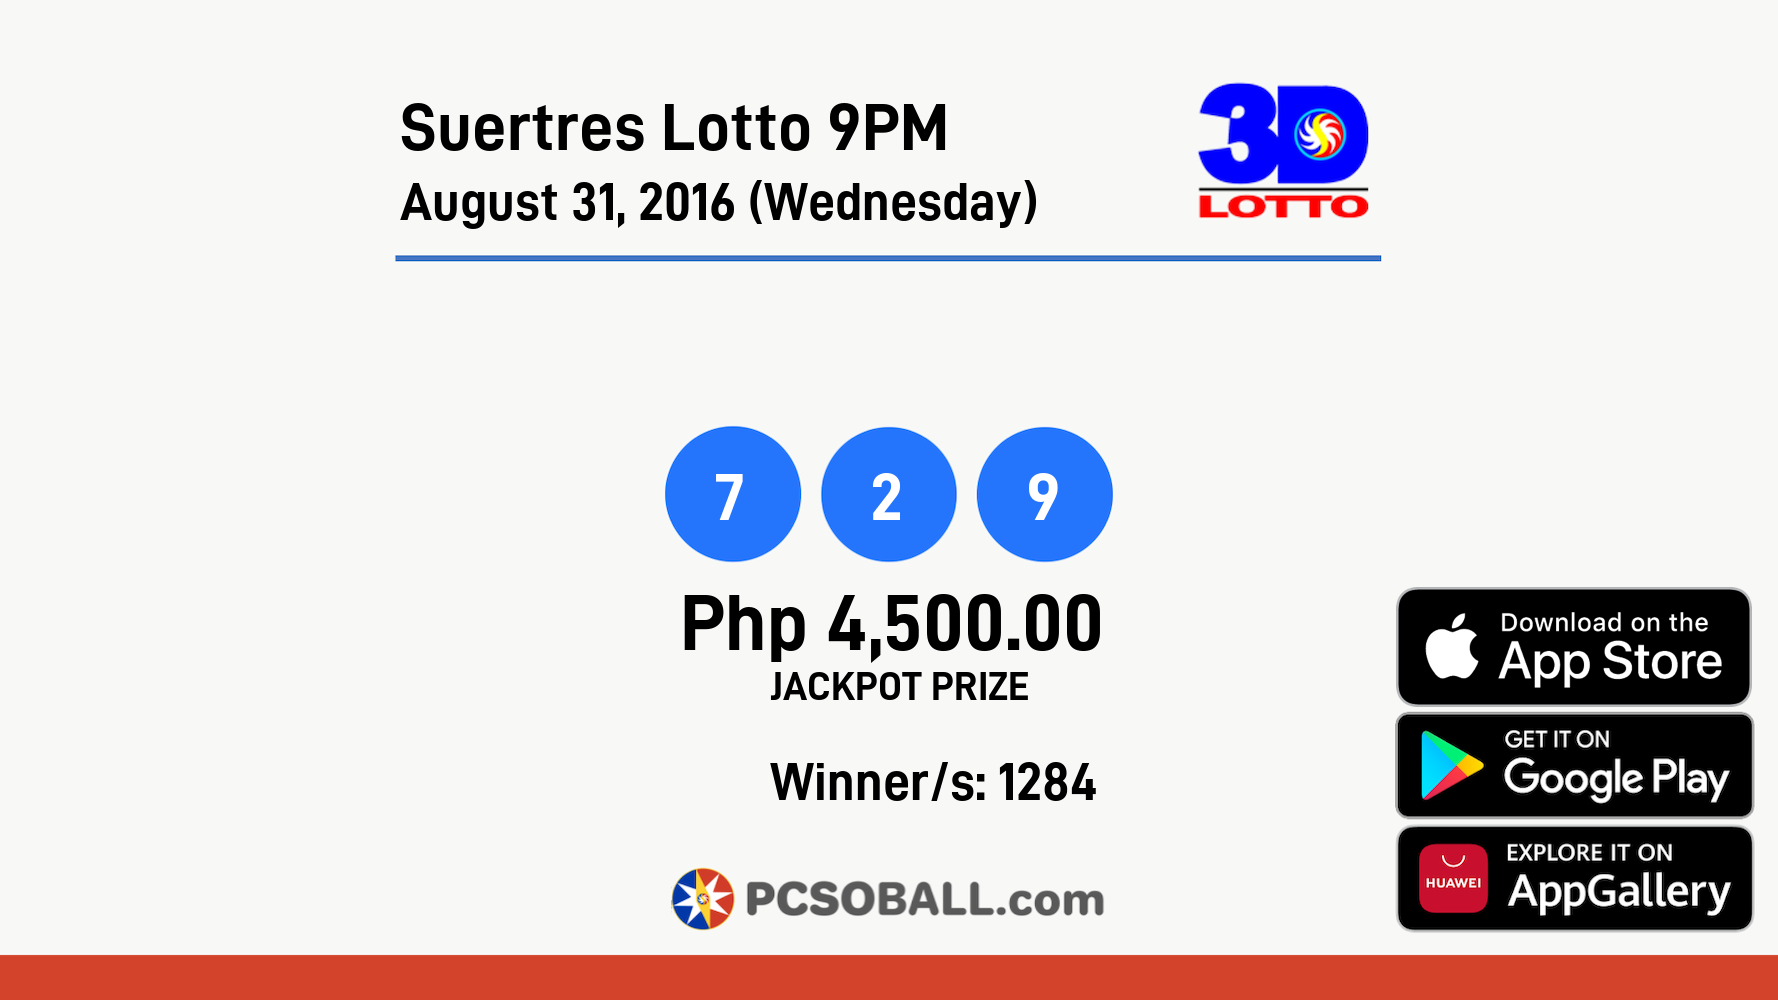 Suertres Lotto 9PM August 31, 2016 (Wednesday) Result